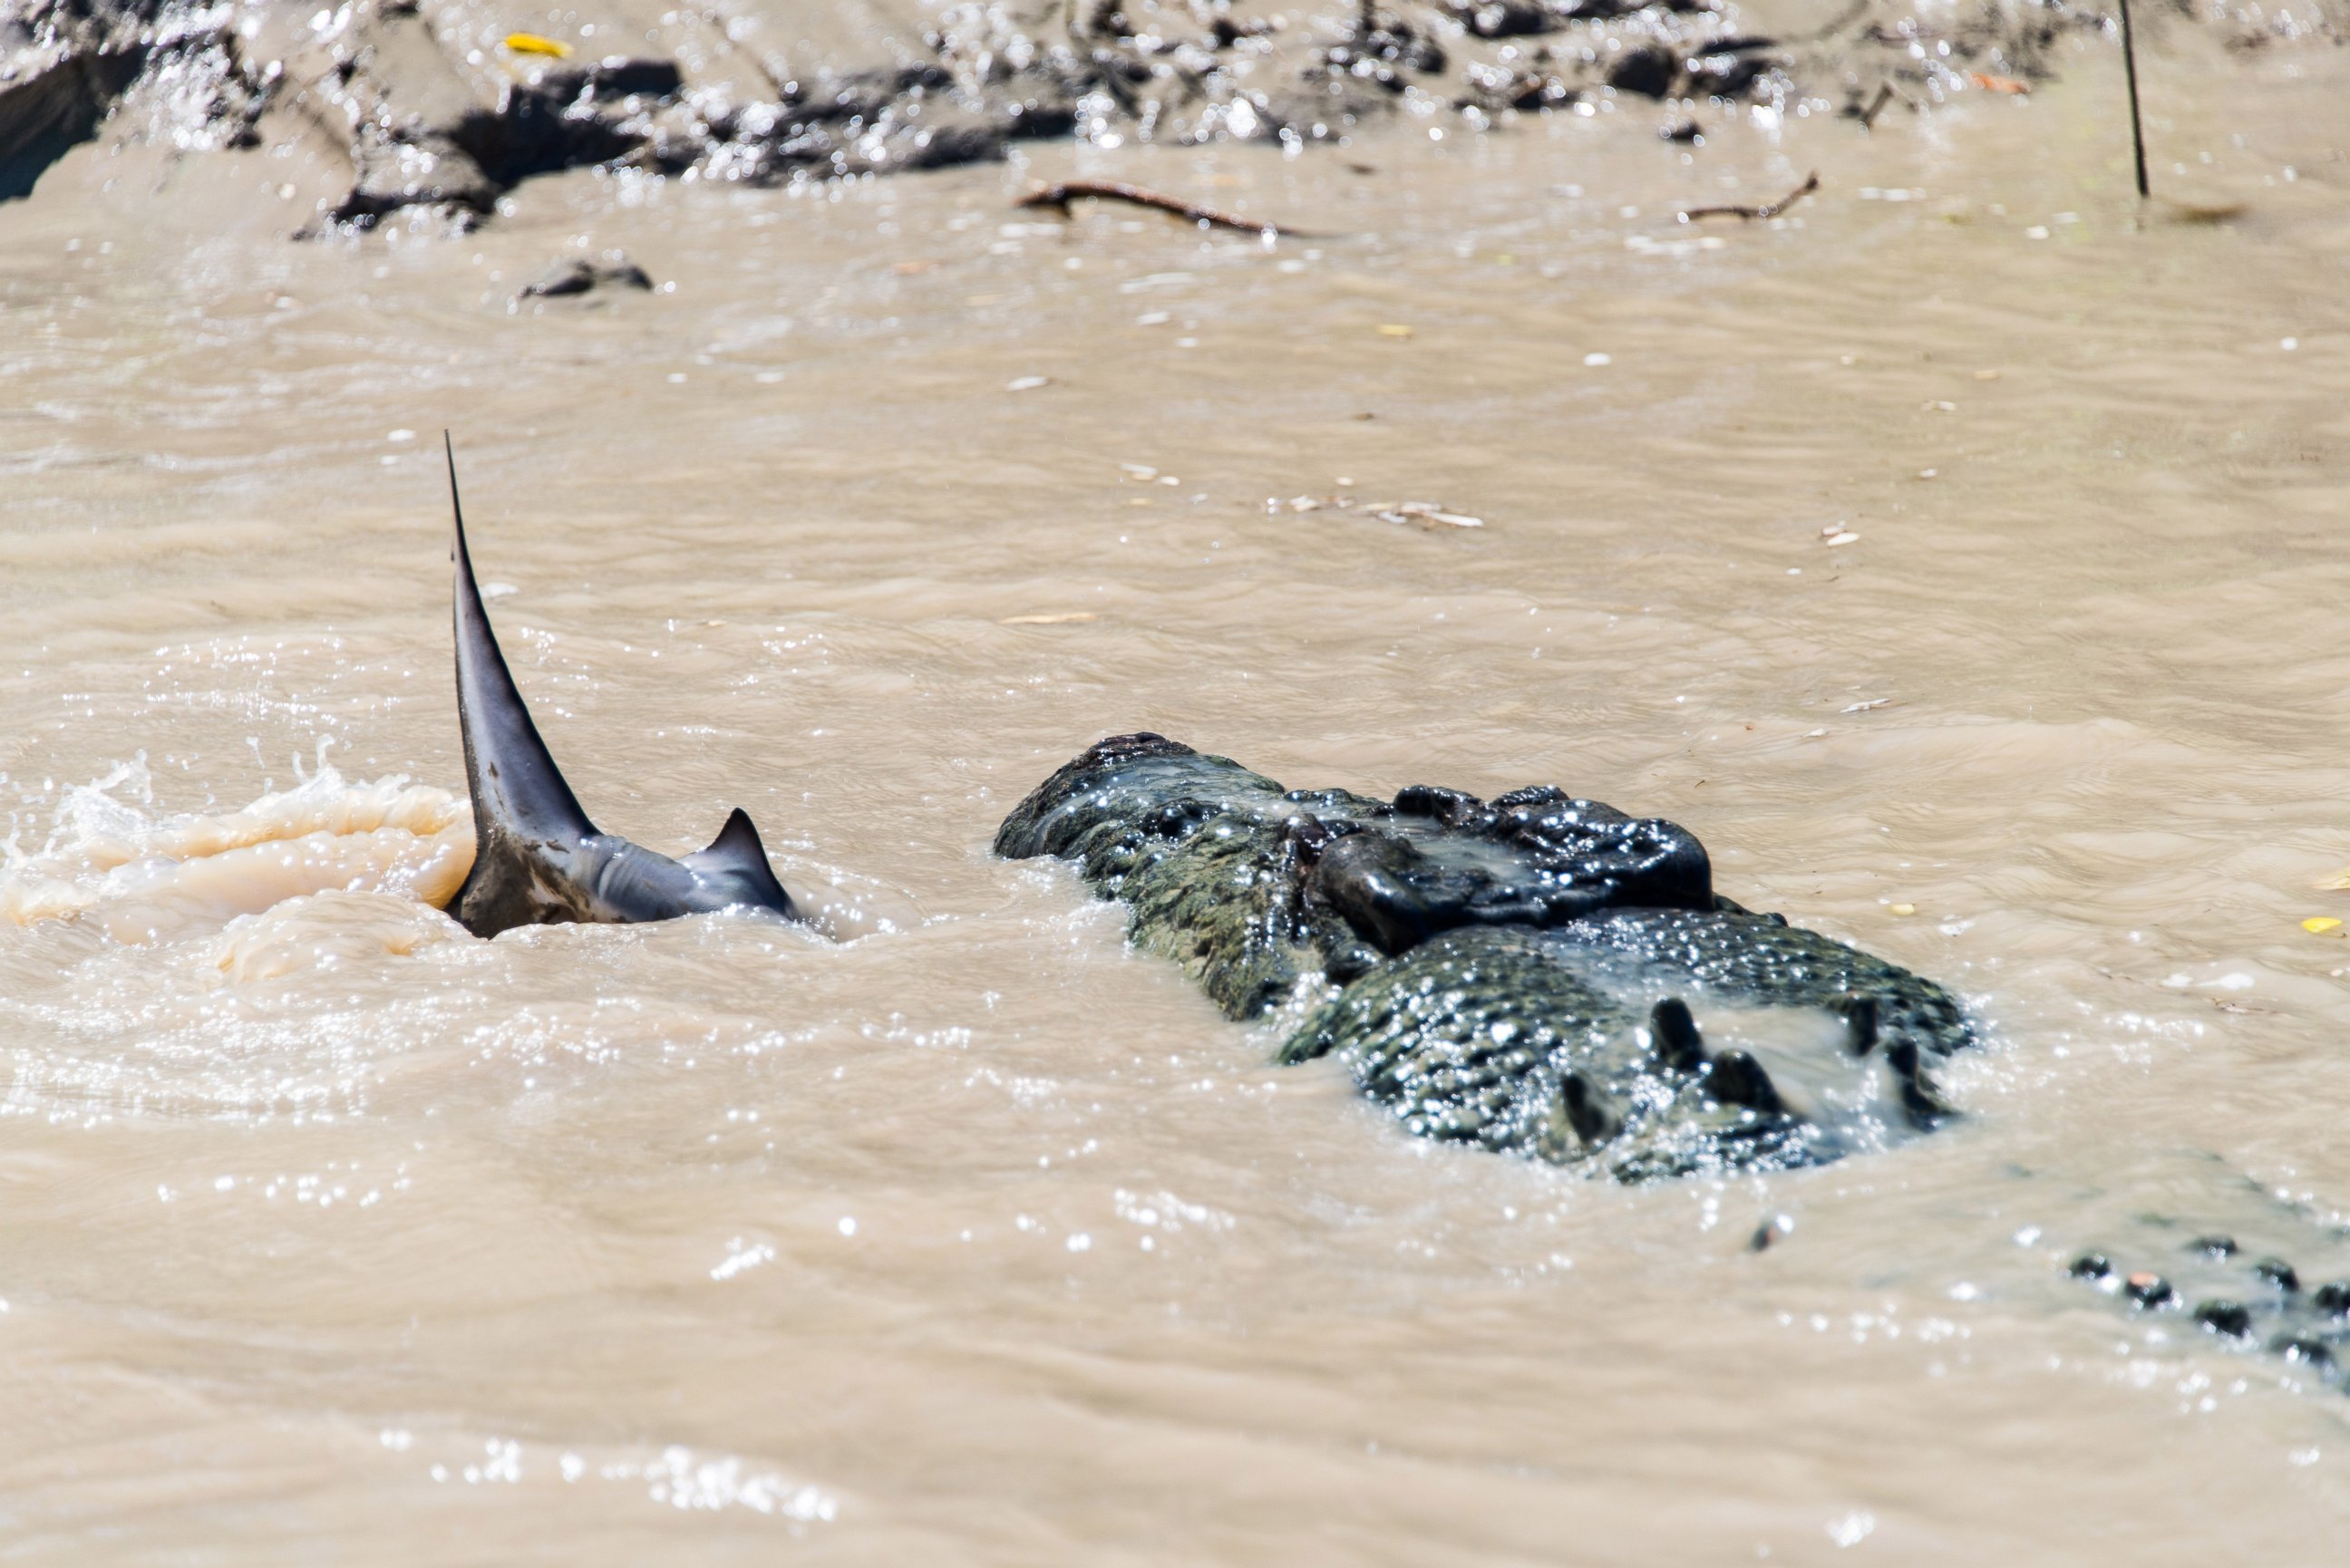 PHOTO: Andrew Paice of Sydney, Australia photographed a crocodile nicknamed "Brutus" eating a shark while on Adelaide River cruise on August 5, 2014.